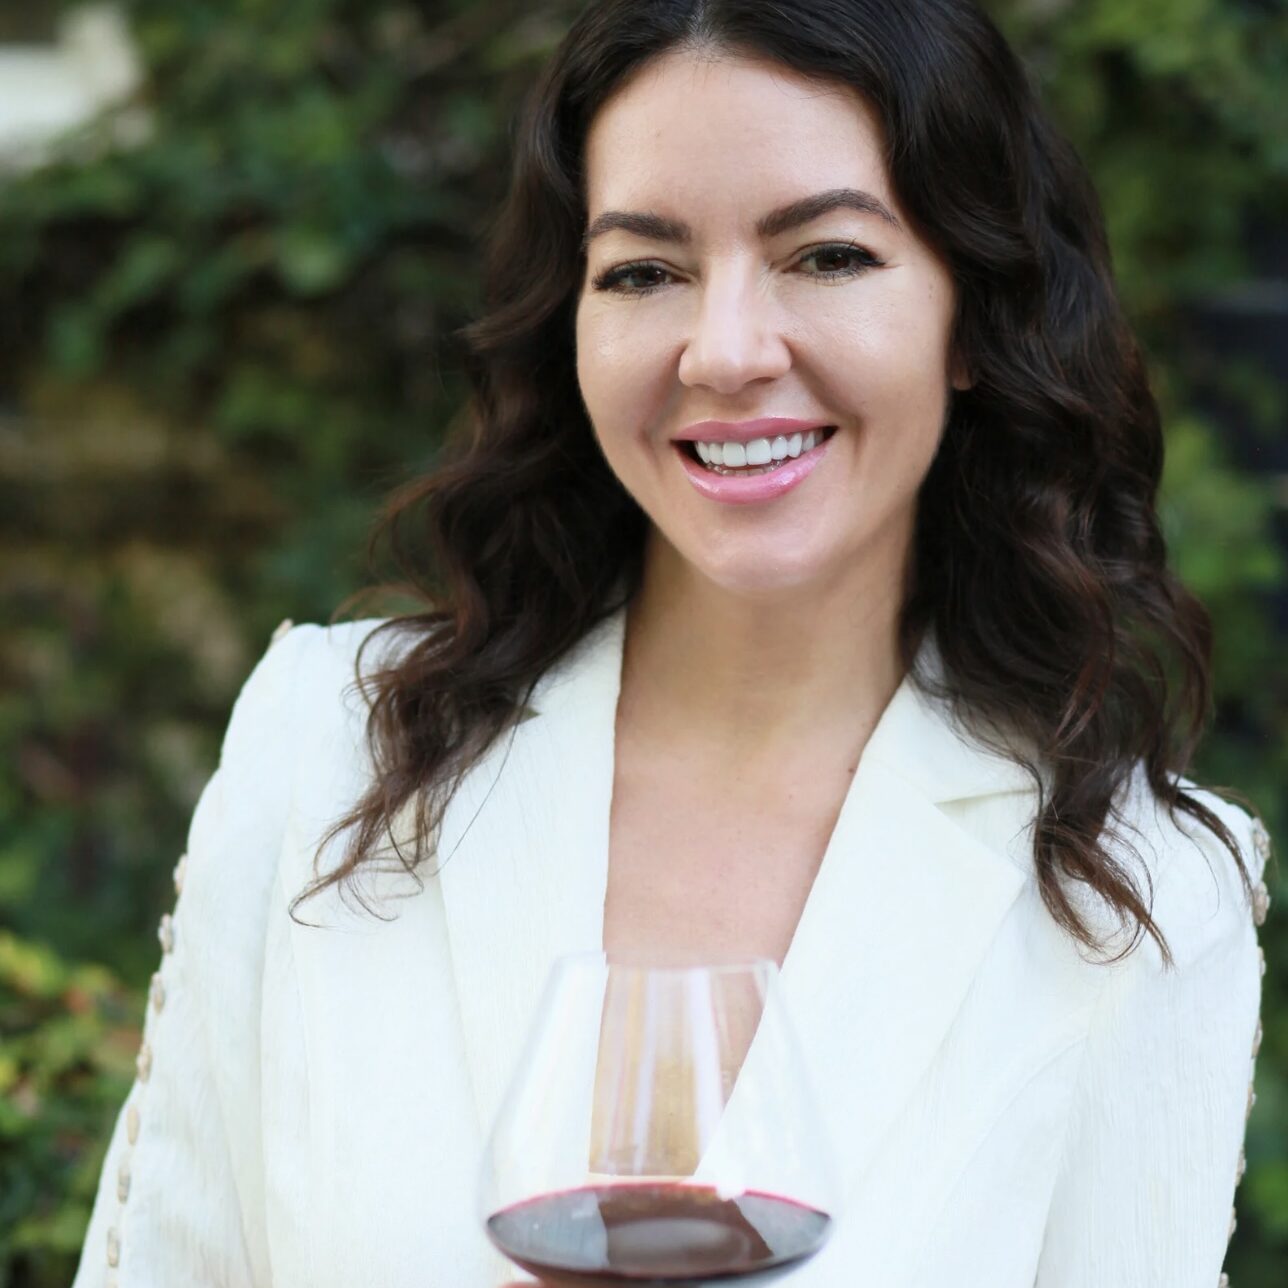 woman holding glass of red wine and smiling